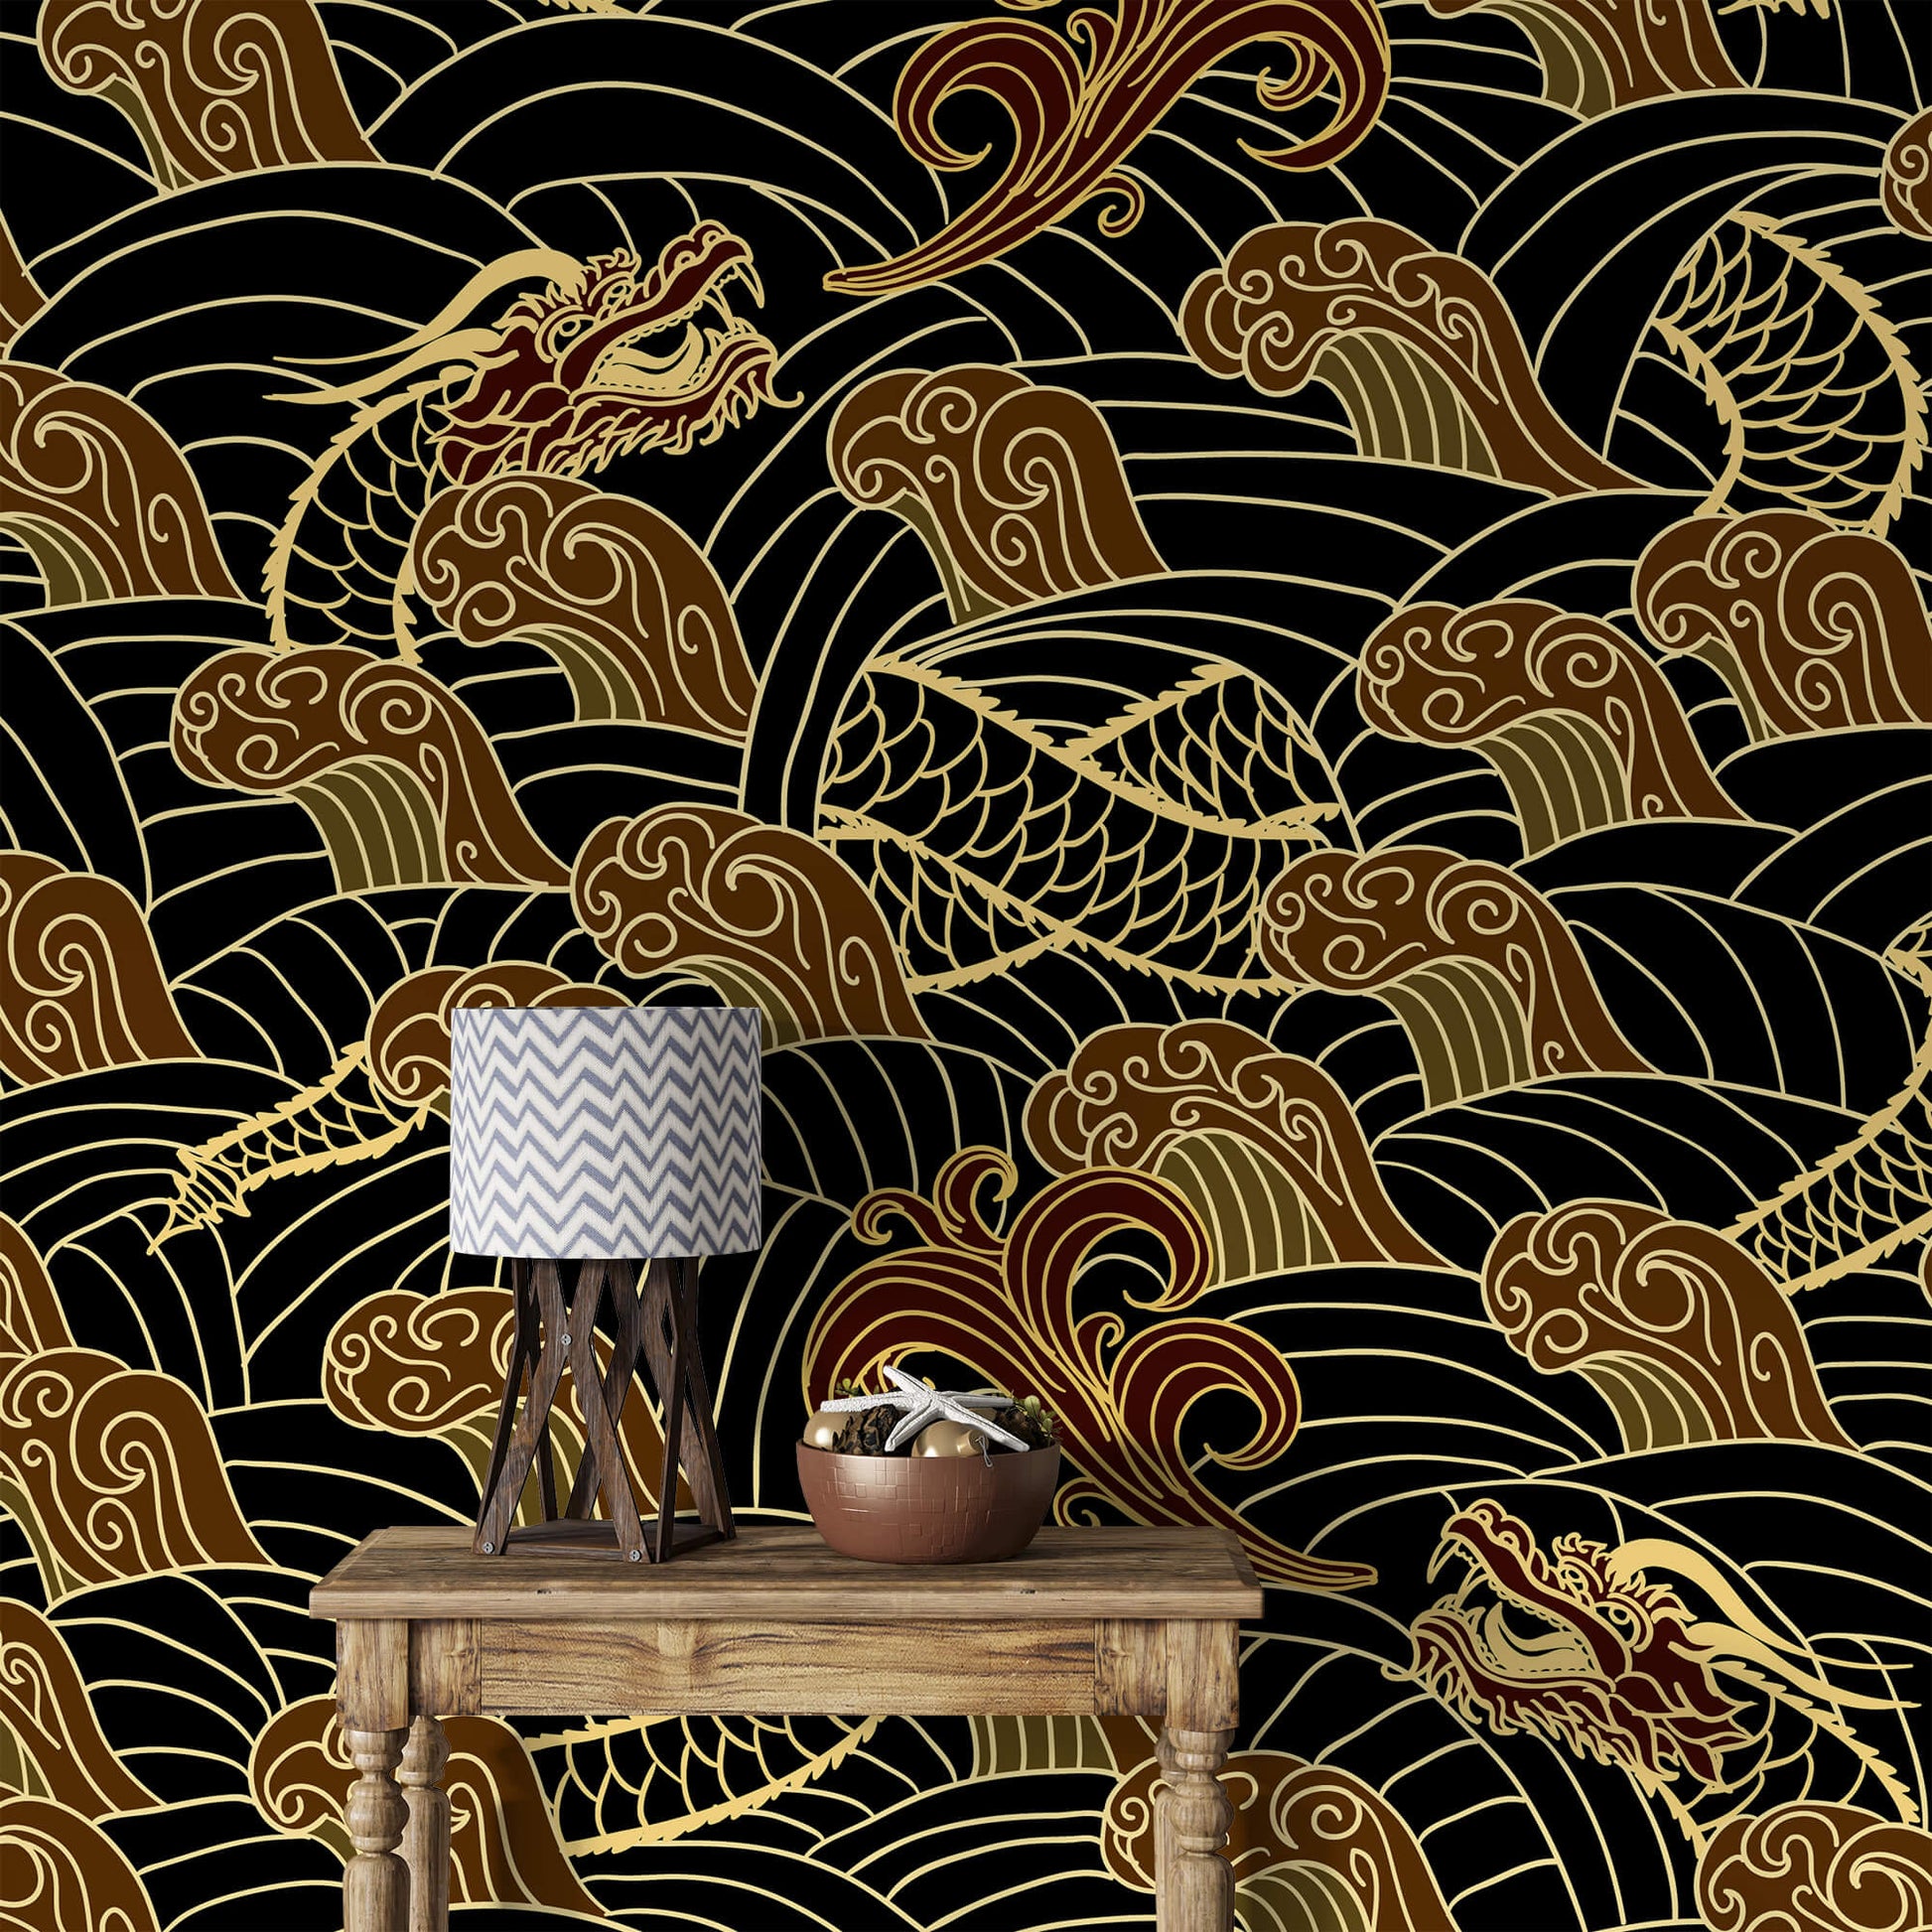 Golden Dragon Waves Wallpaper: Invite the mystique of the East into your space with this captivating design, featuring golden dragons amidst swirling waves, evoking a sense of power and elegance, perfect for creating a statement in any room.